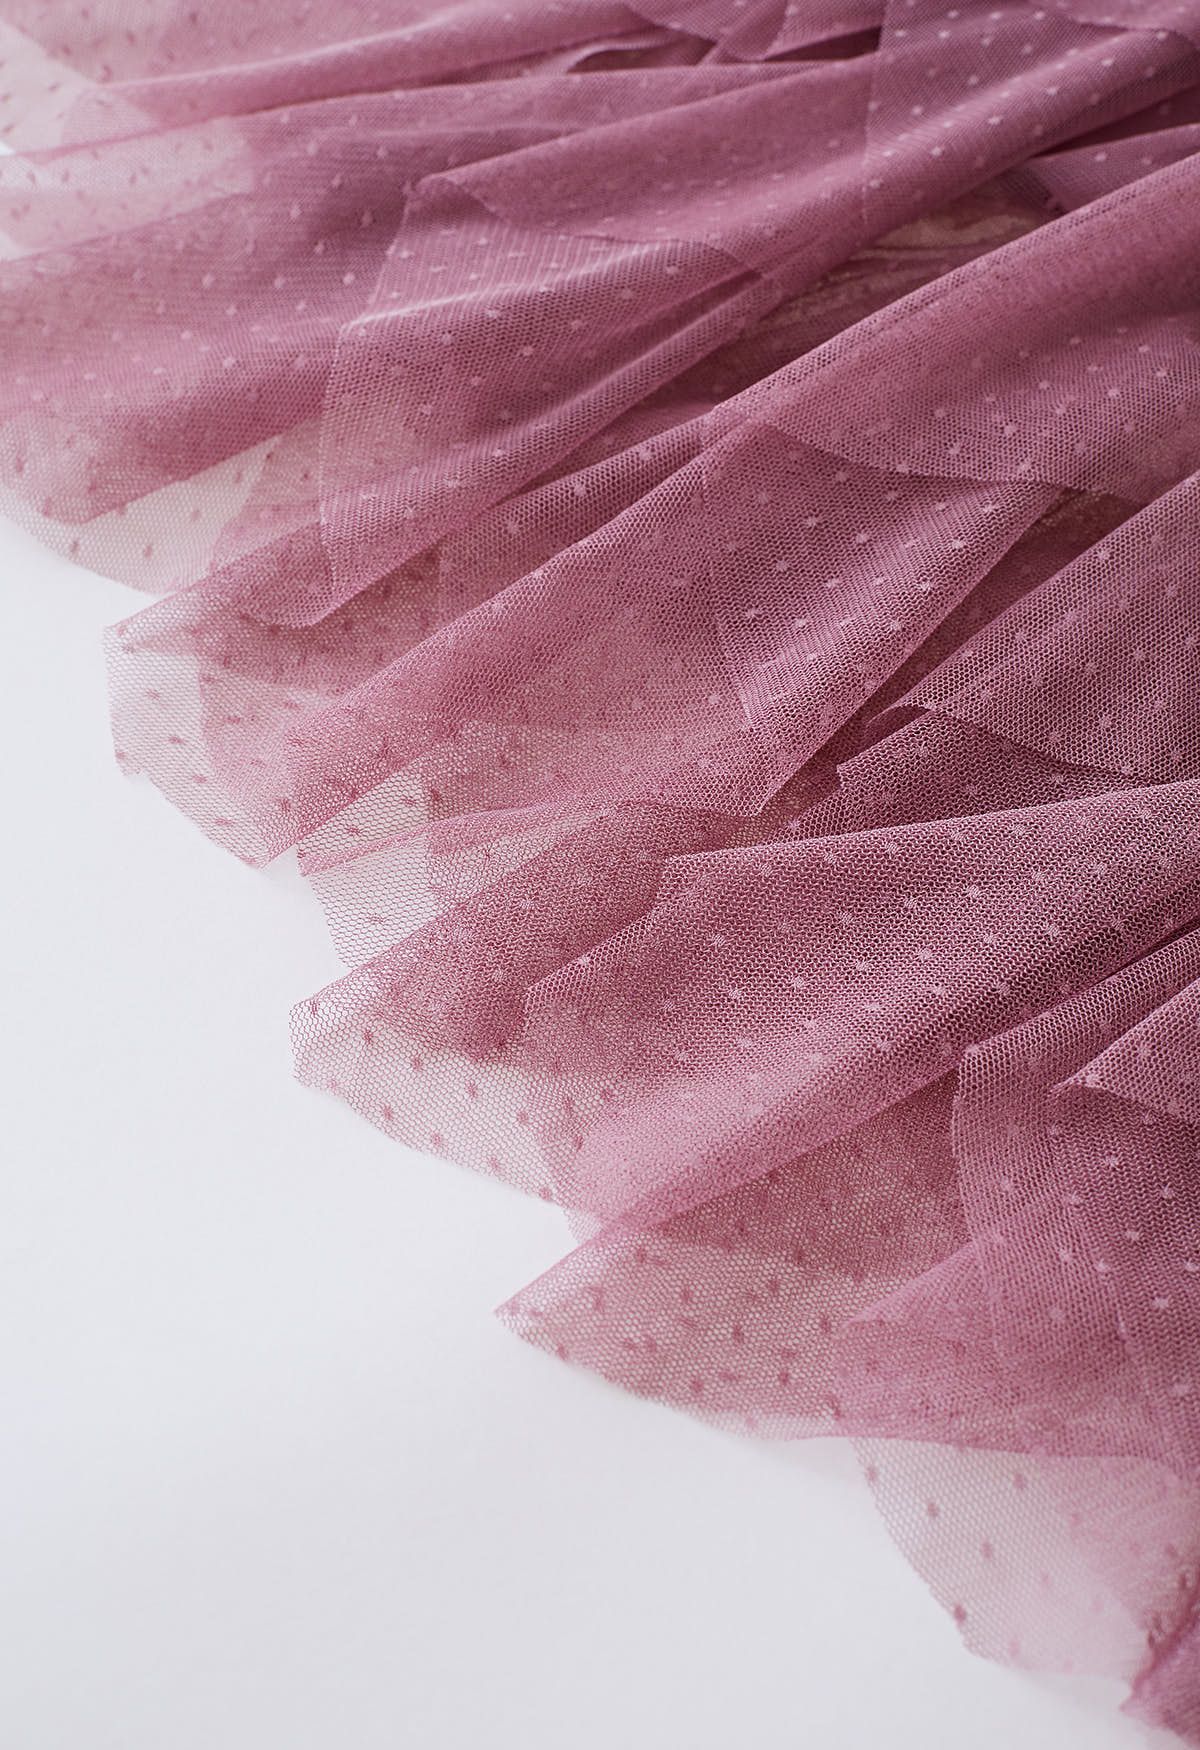 Dots Full Ruffled Tulle Skirt in Mauve - Retro, Indie and Unique Fashion